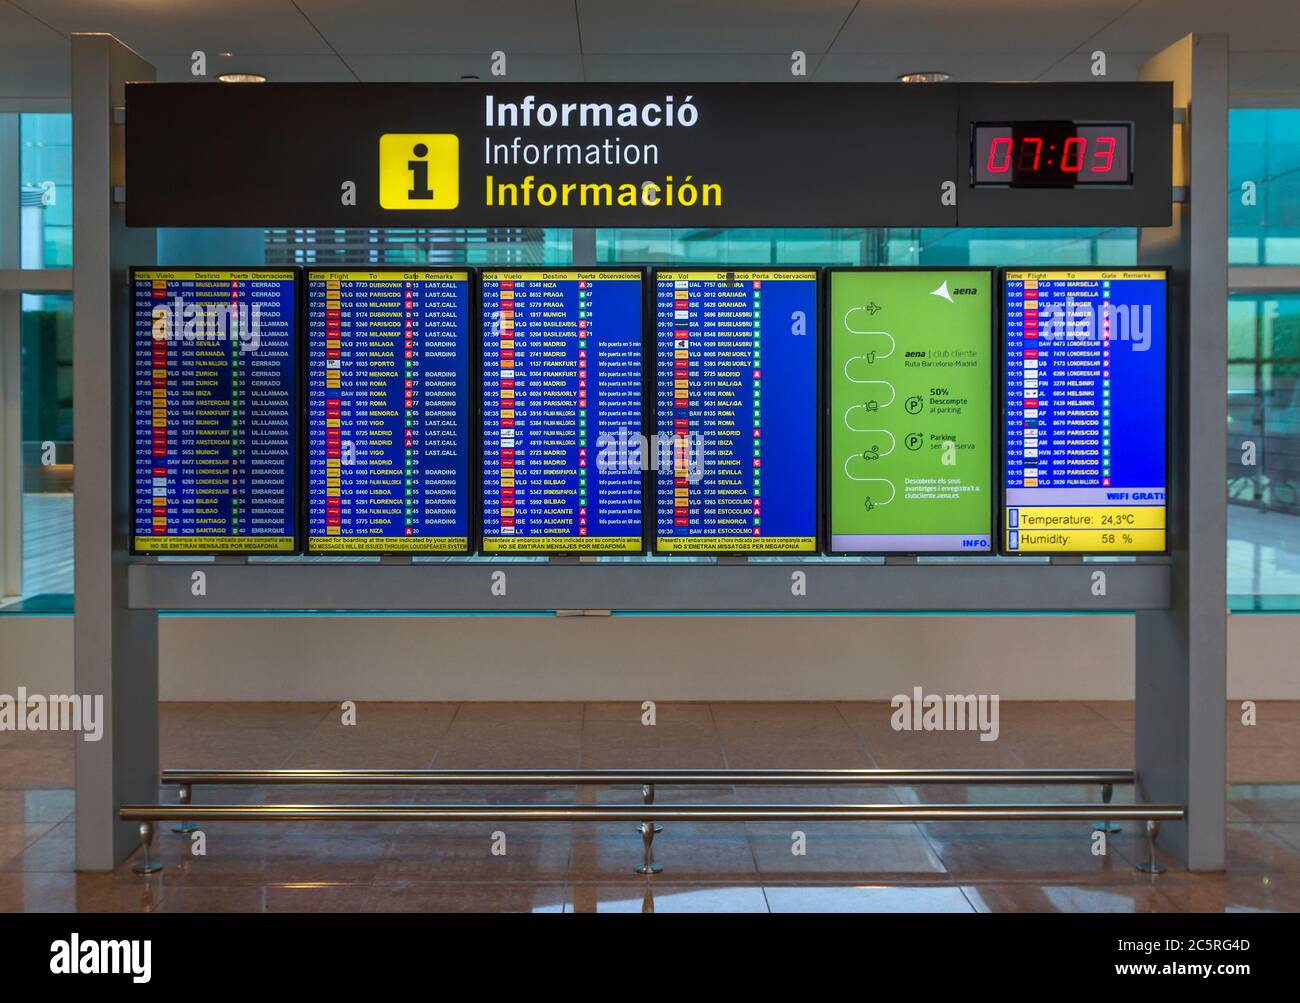 BARCELONA, SPAIN - JULY 16, 2015: Departures board in El Prat-Barcelona airport. This airport was inaugurated in 1963. Airport is one of the biggest i Stock Photo